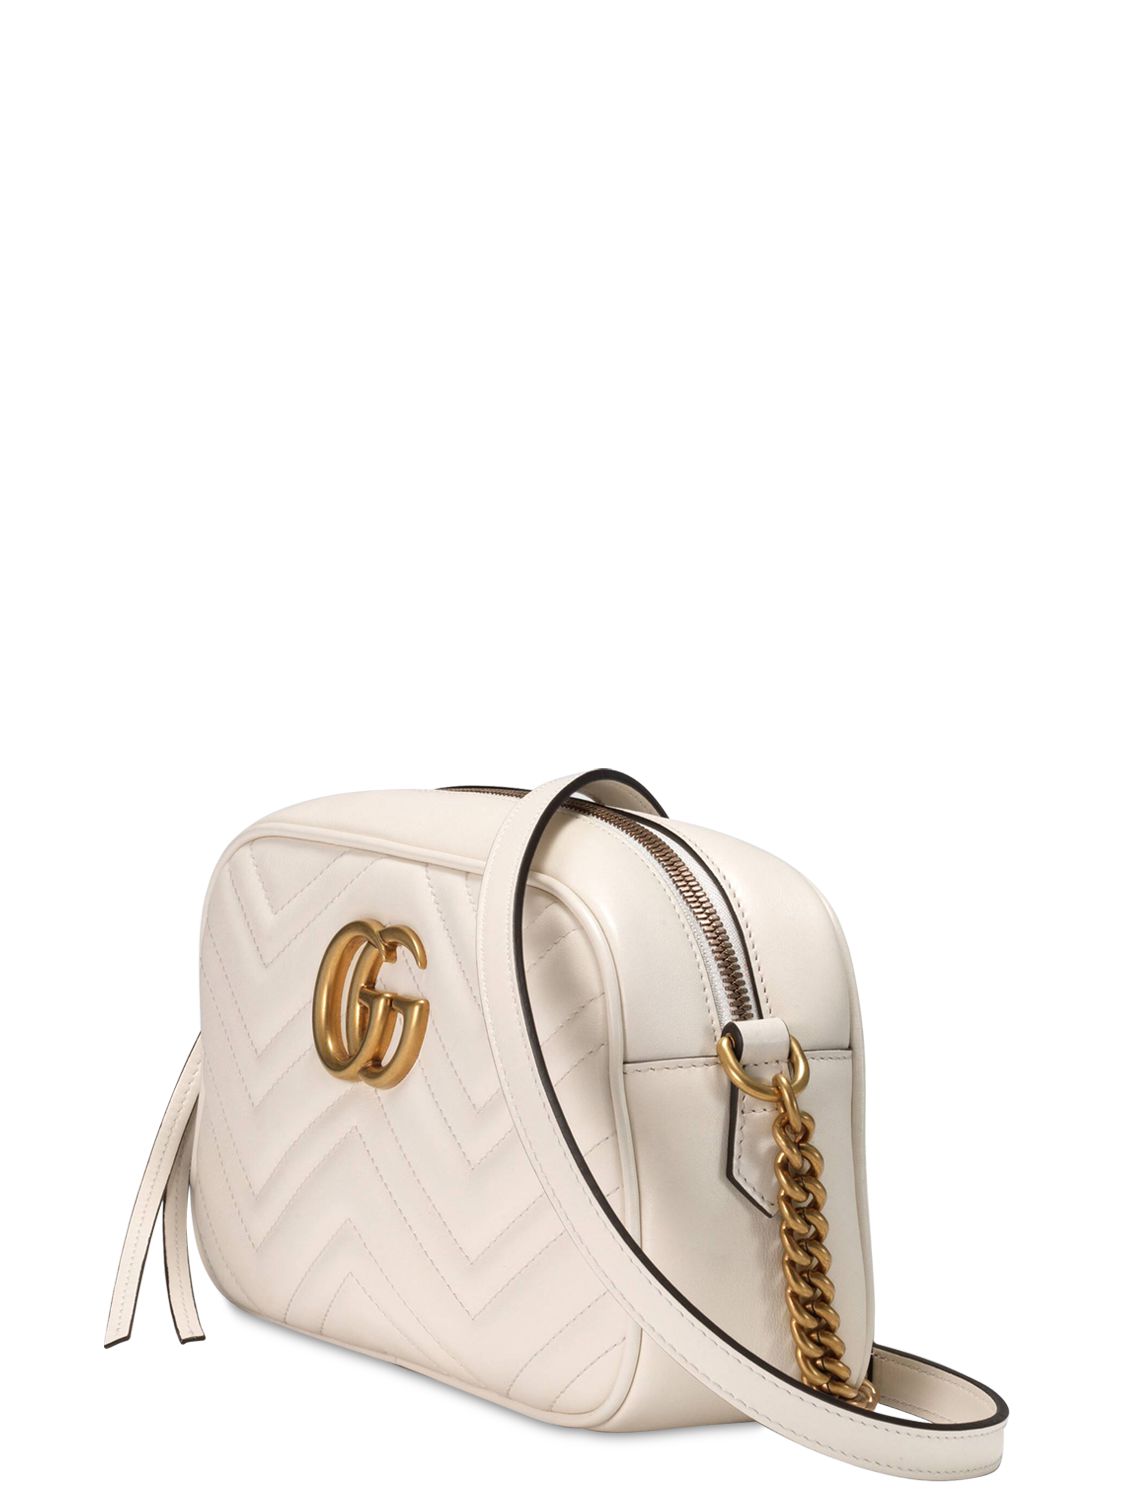  Gucci Gg Marmont Leather Camera Bag 